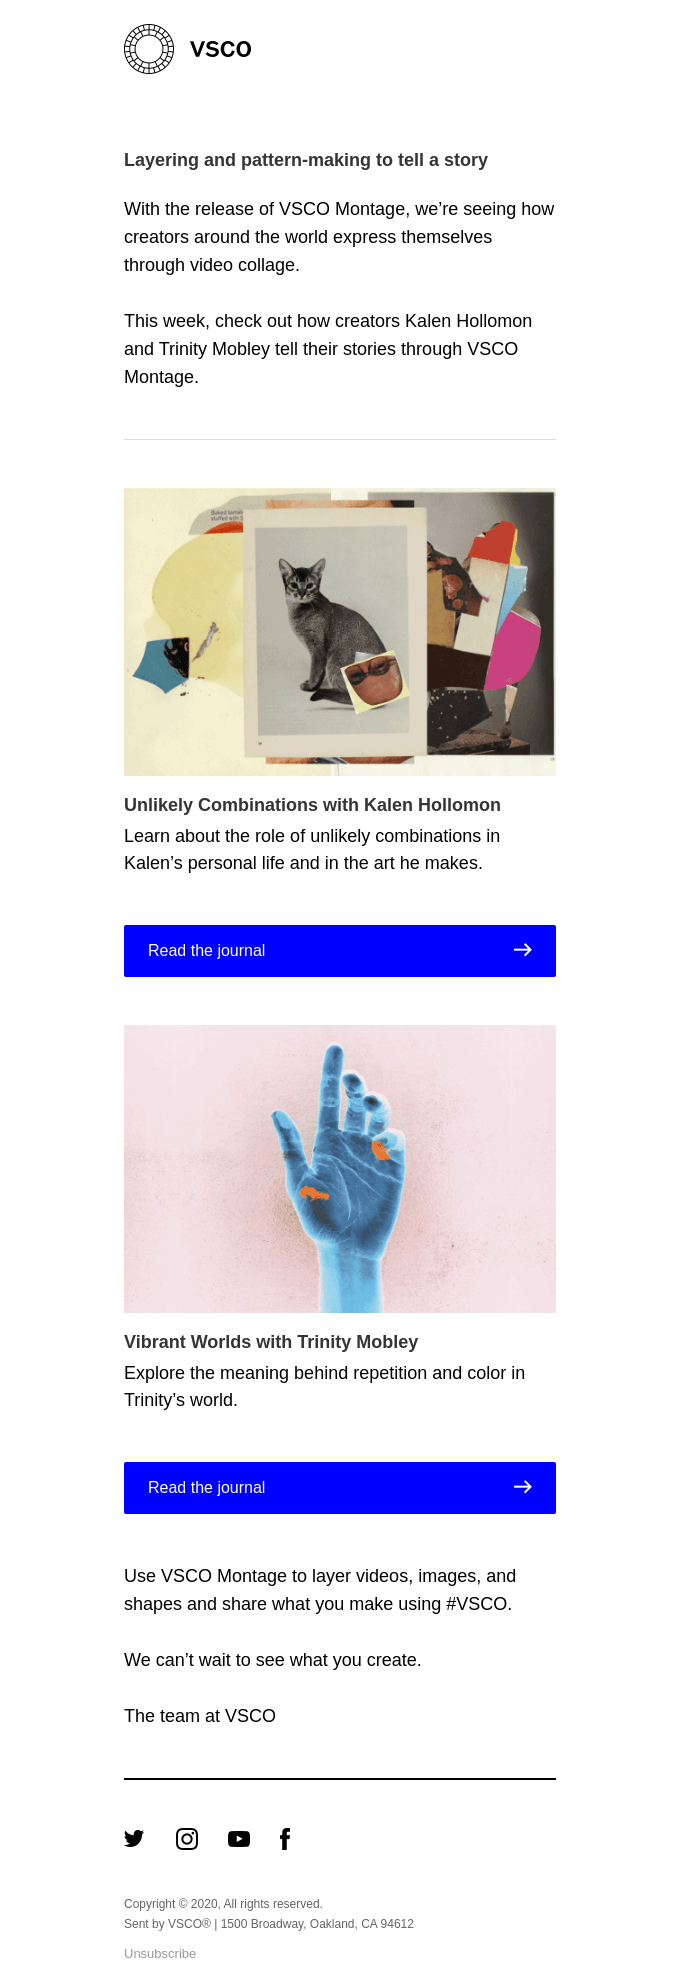 Case Study Email Examples: Screenshot of VSCO's email showcasing customer experiences